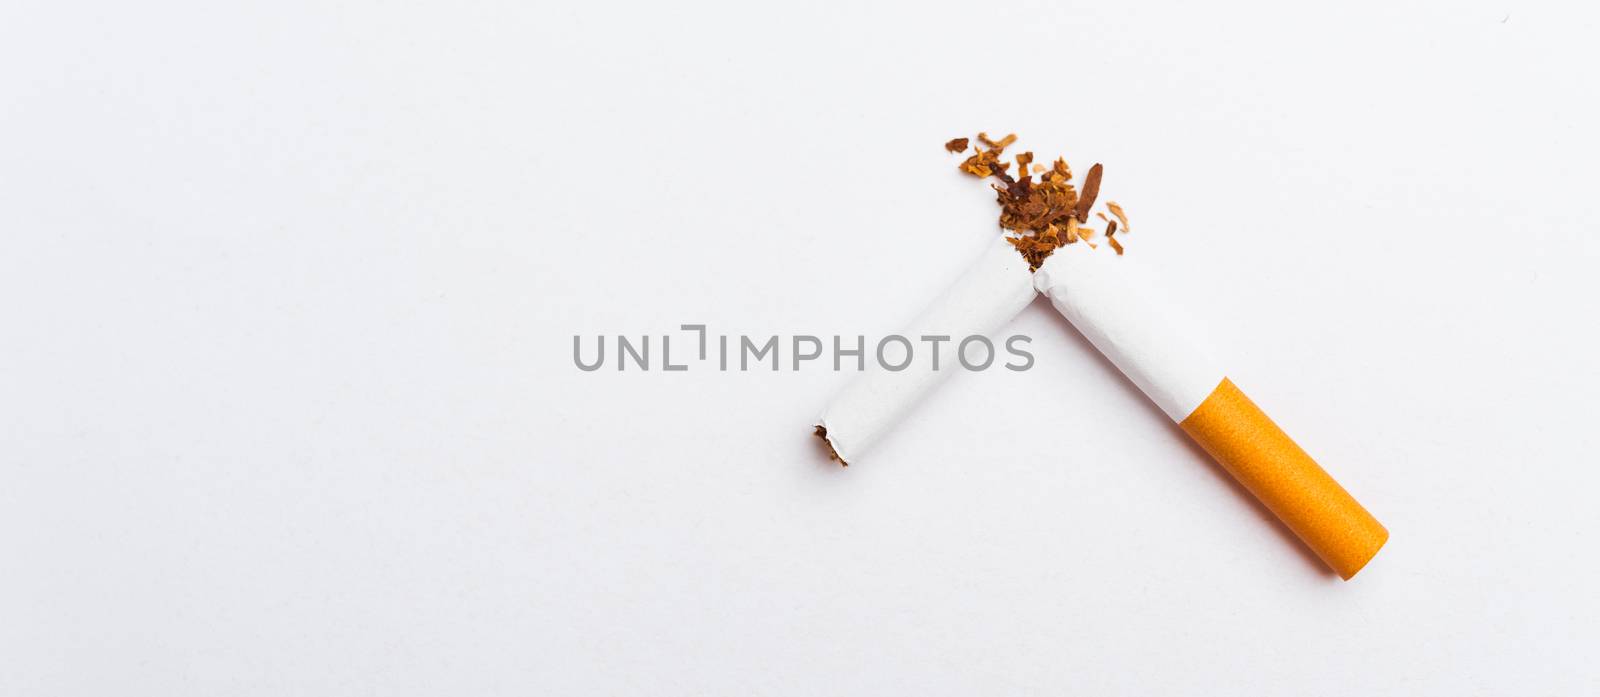 31 May of World No Tobacco Day, no smoking, close up of broken pile cigarette or tobacco STOP symbolic on white background with banner copy space, and Warning lung health concept